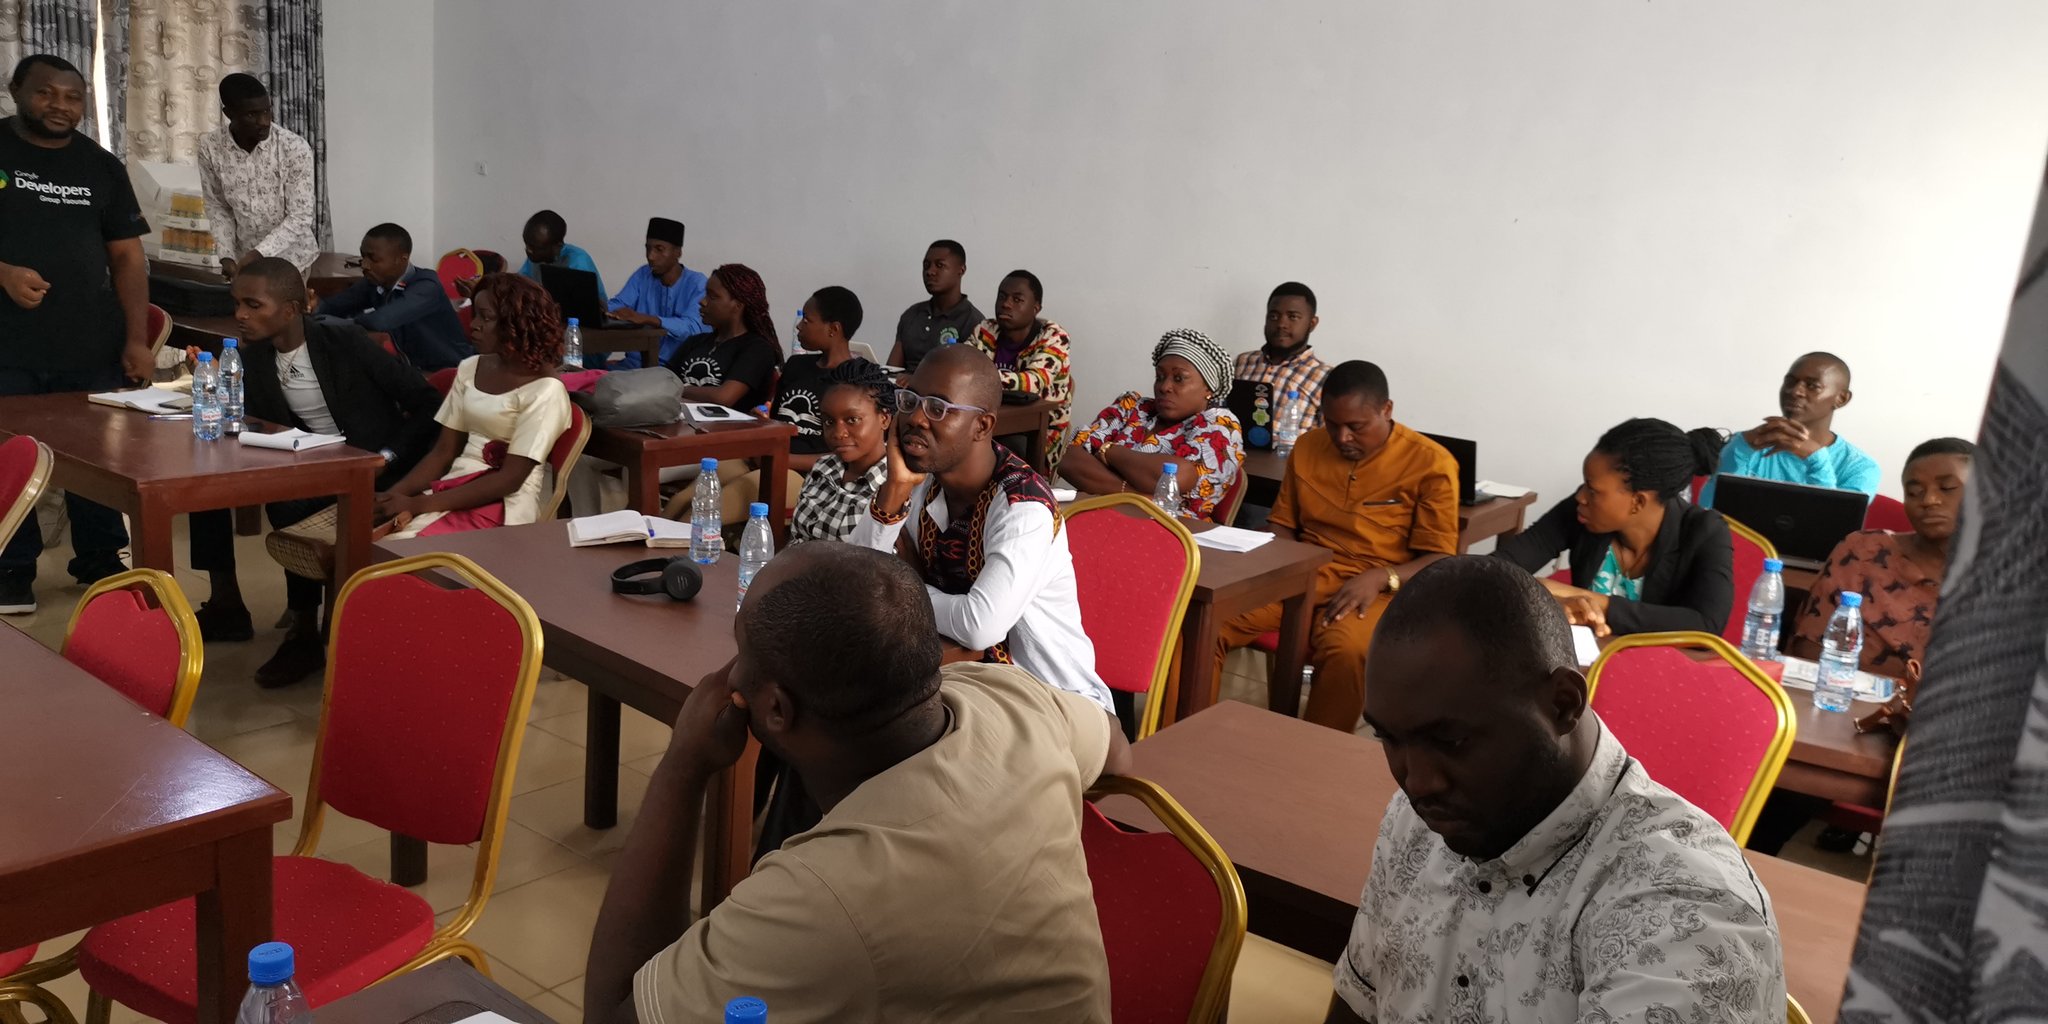 Afroleadership marks Open Data Day 2020 in Cameroon